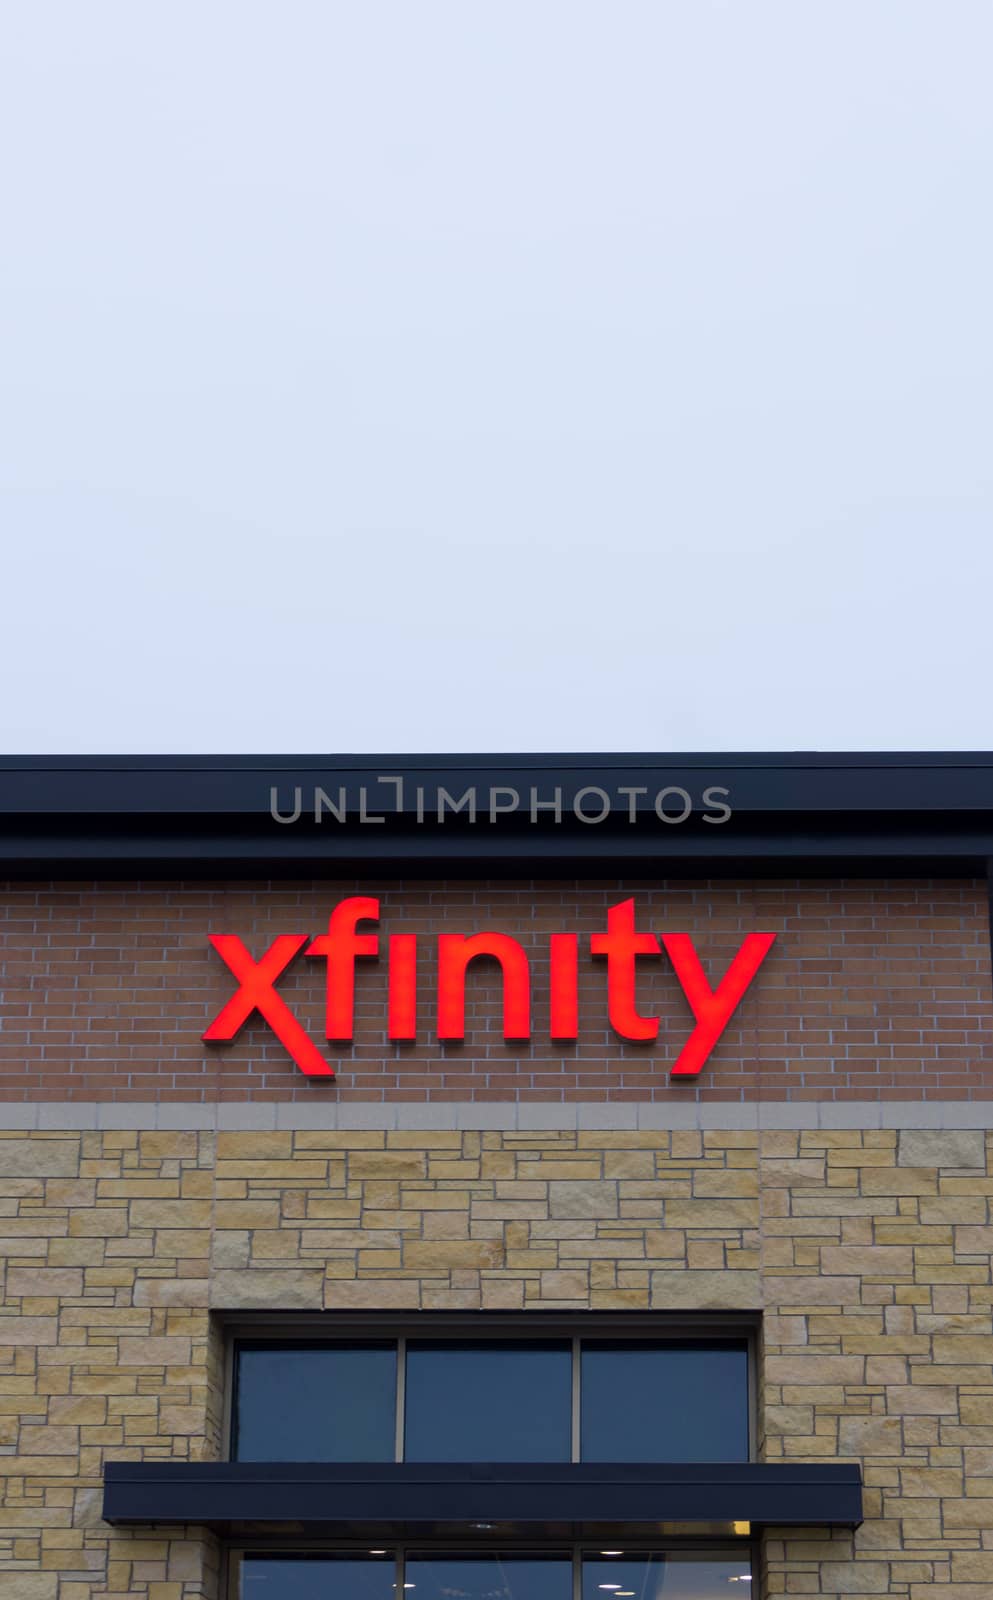 Xfinity Retail Store Exterior and Sign by wolterk